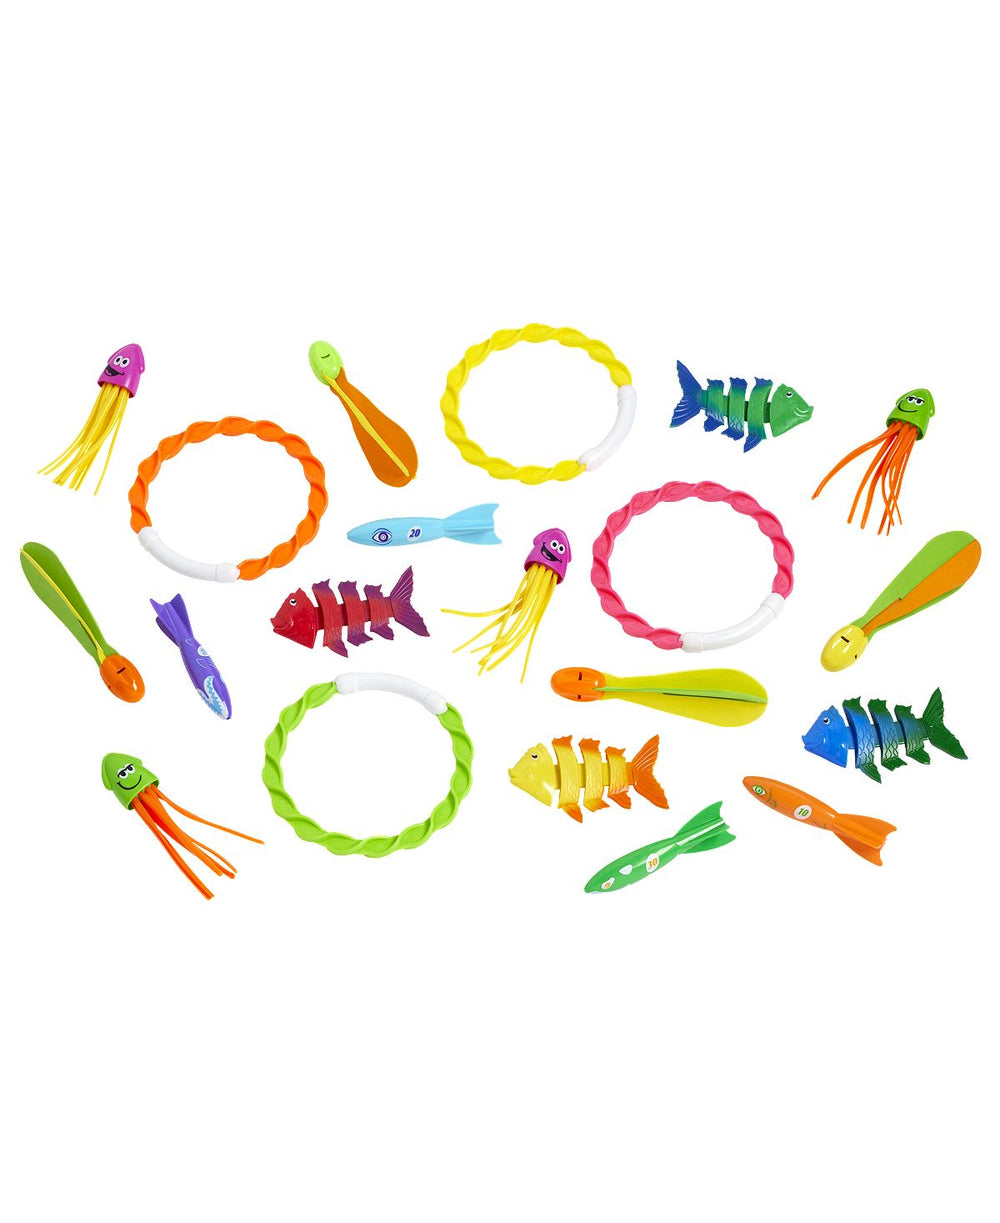 Toys R Us Sizzlin Cool 20-Piece Pool Diving Toy Set with Colorful Aquatic Figures